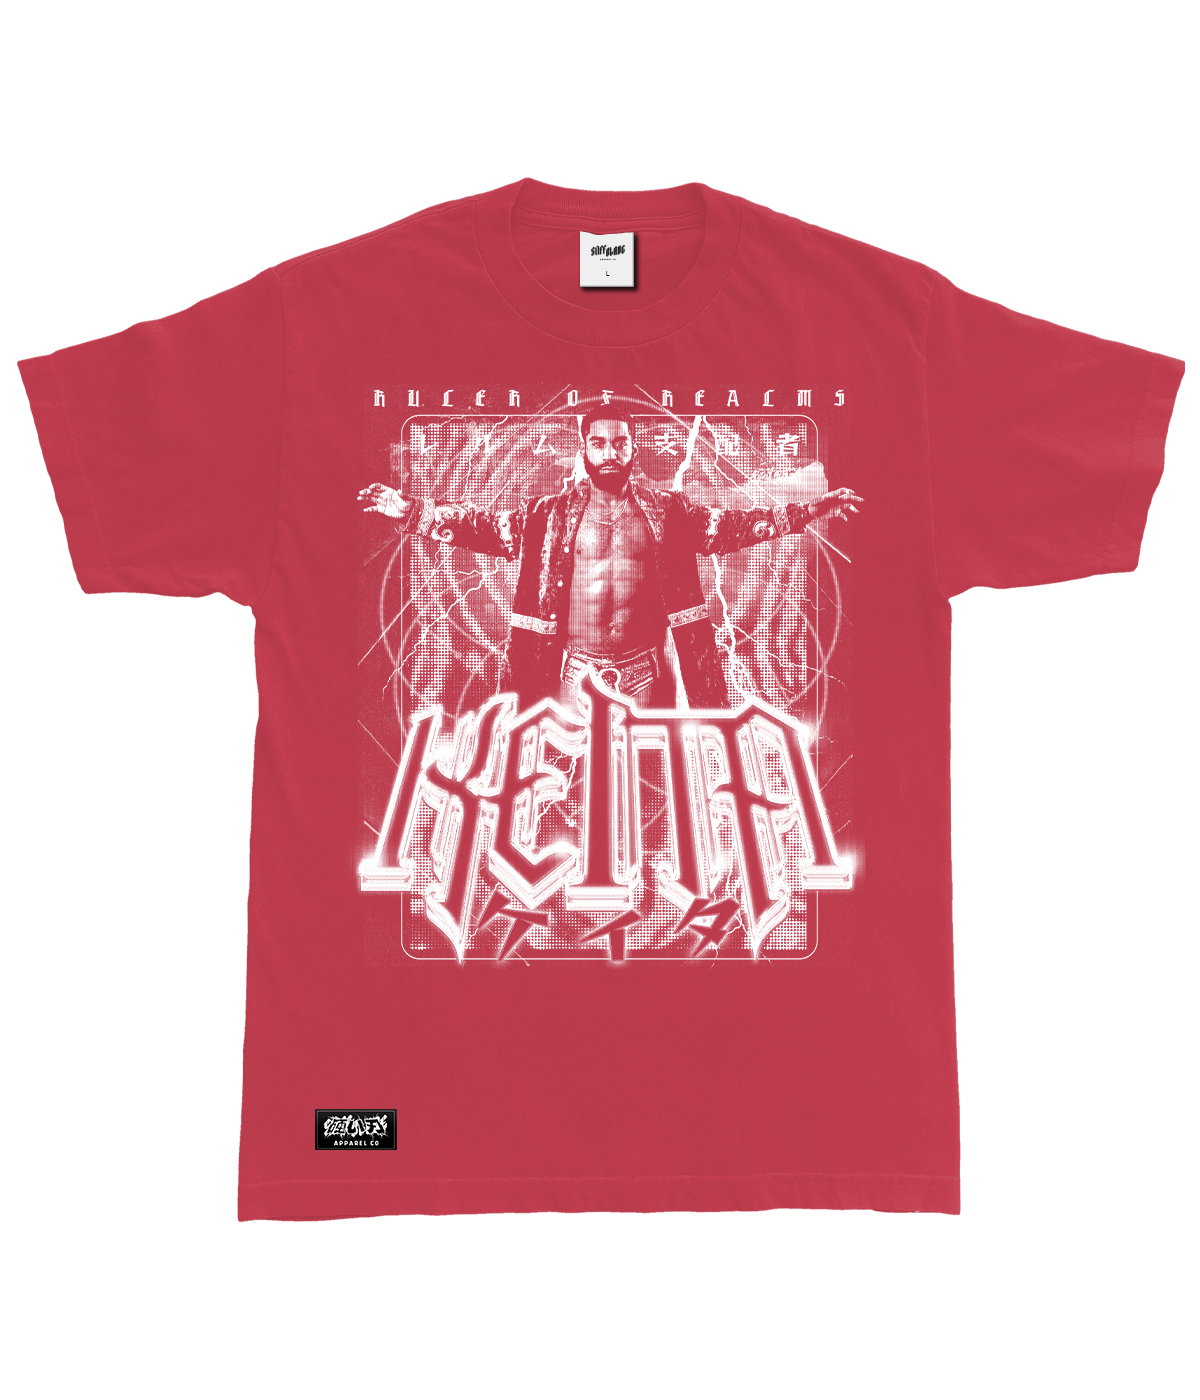 KEITA - Ruler of Realms Shirt (Multiple Color Options)